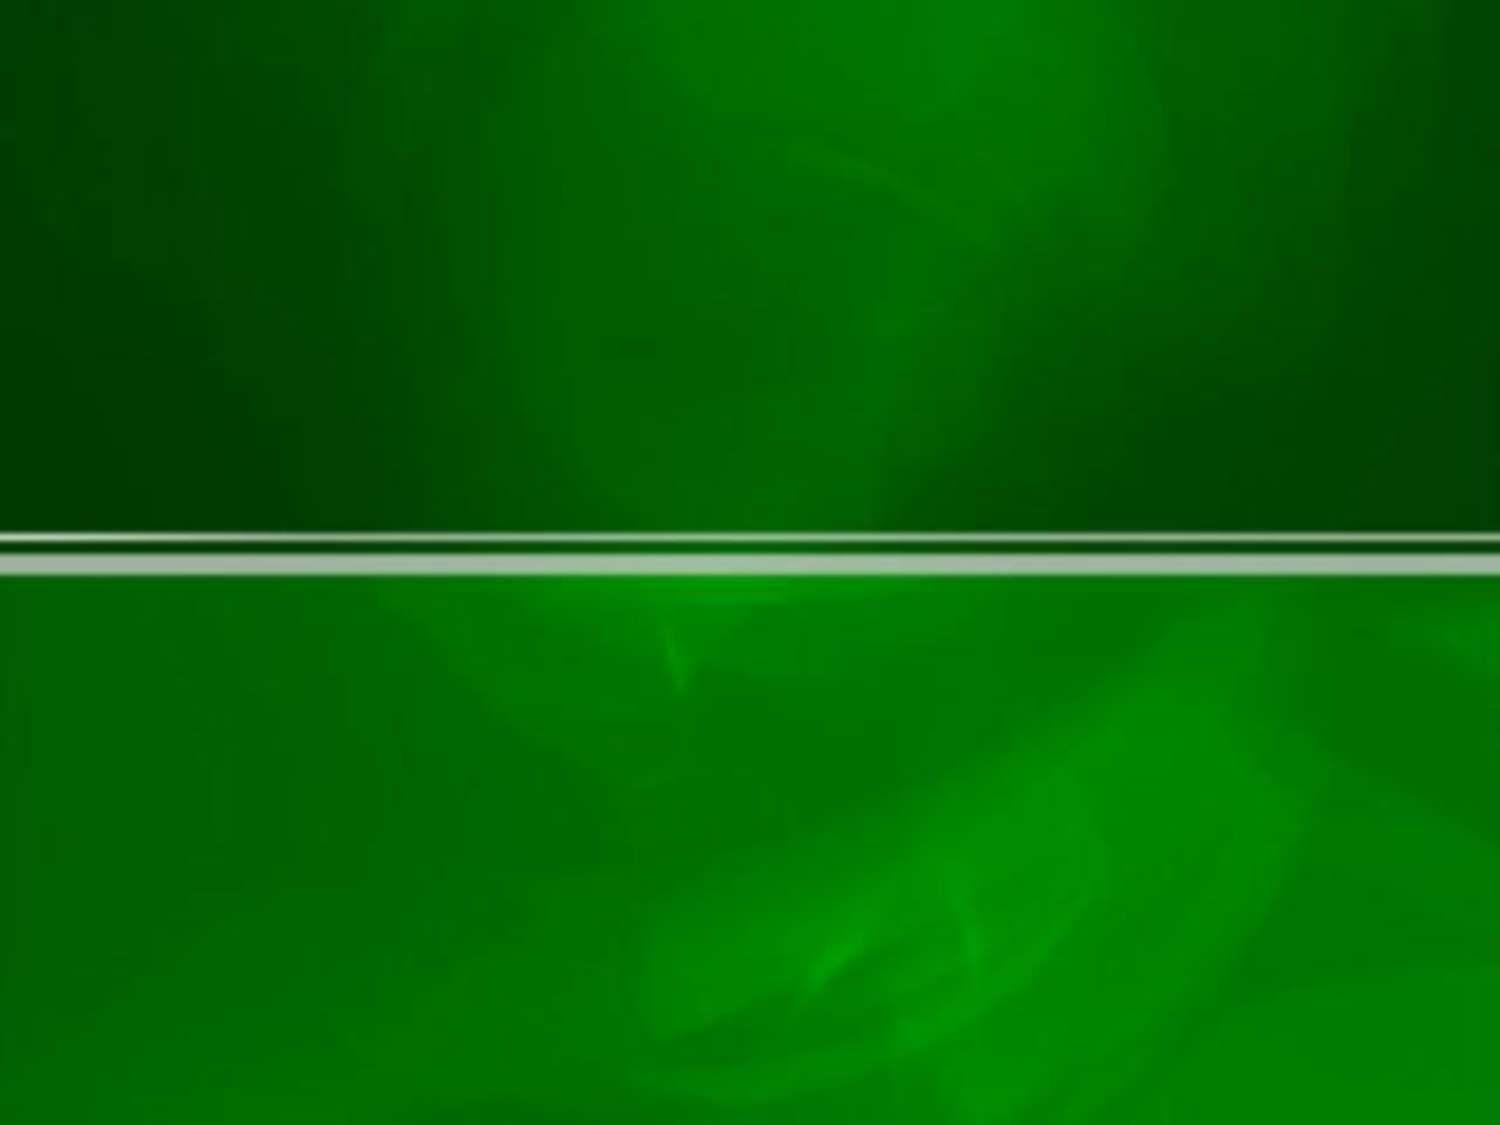 Free Green Photonic Background For PowerPoint